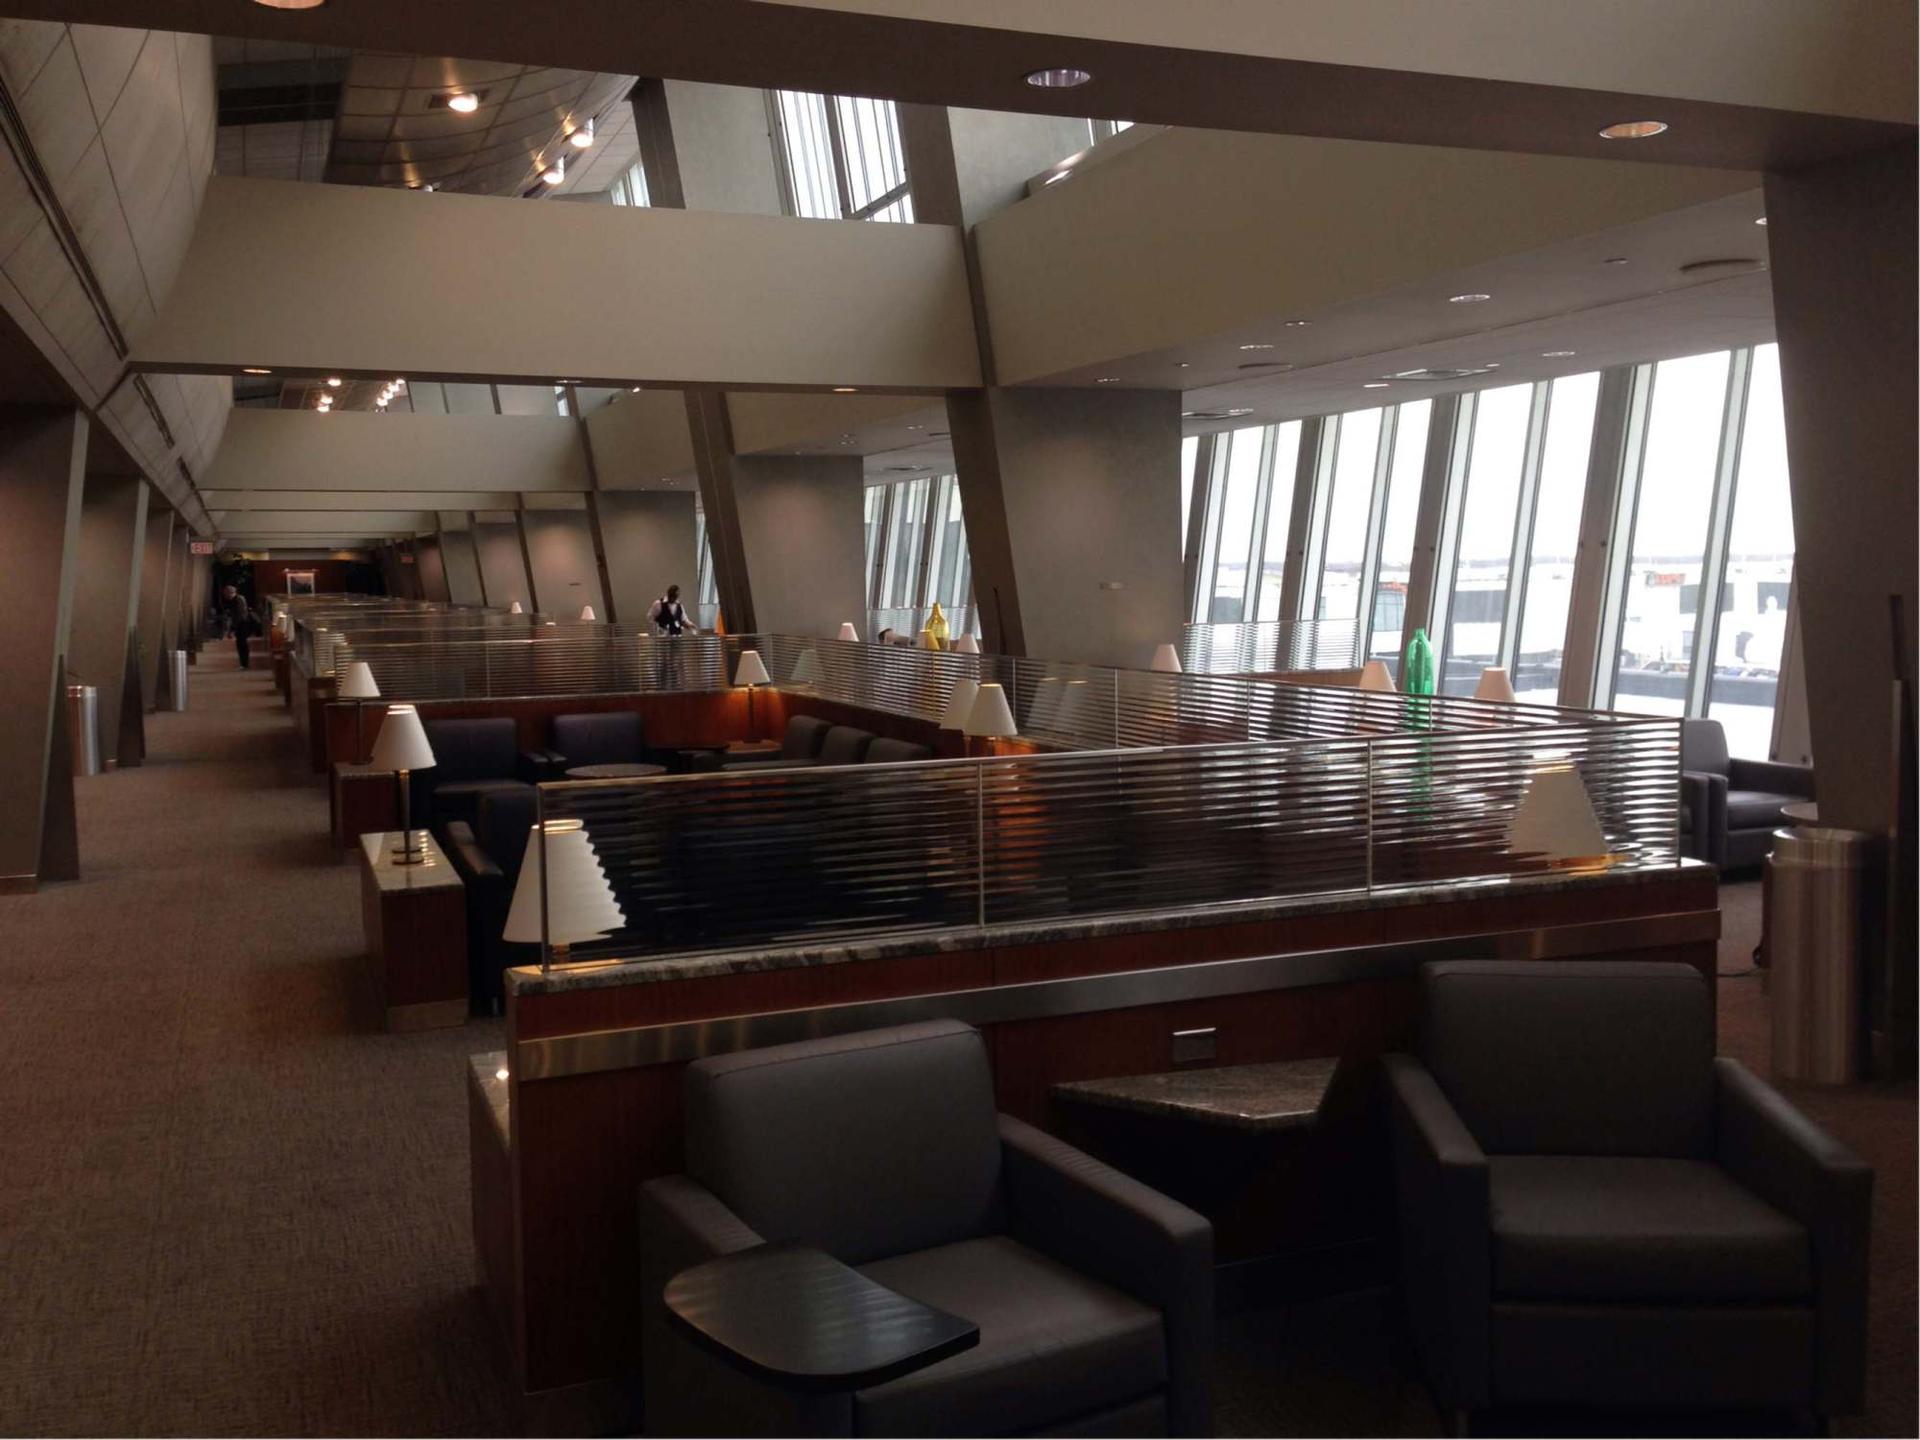 American Airlines Admirals Club image 1 of 48